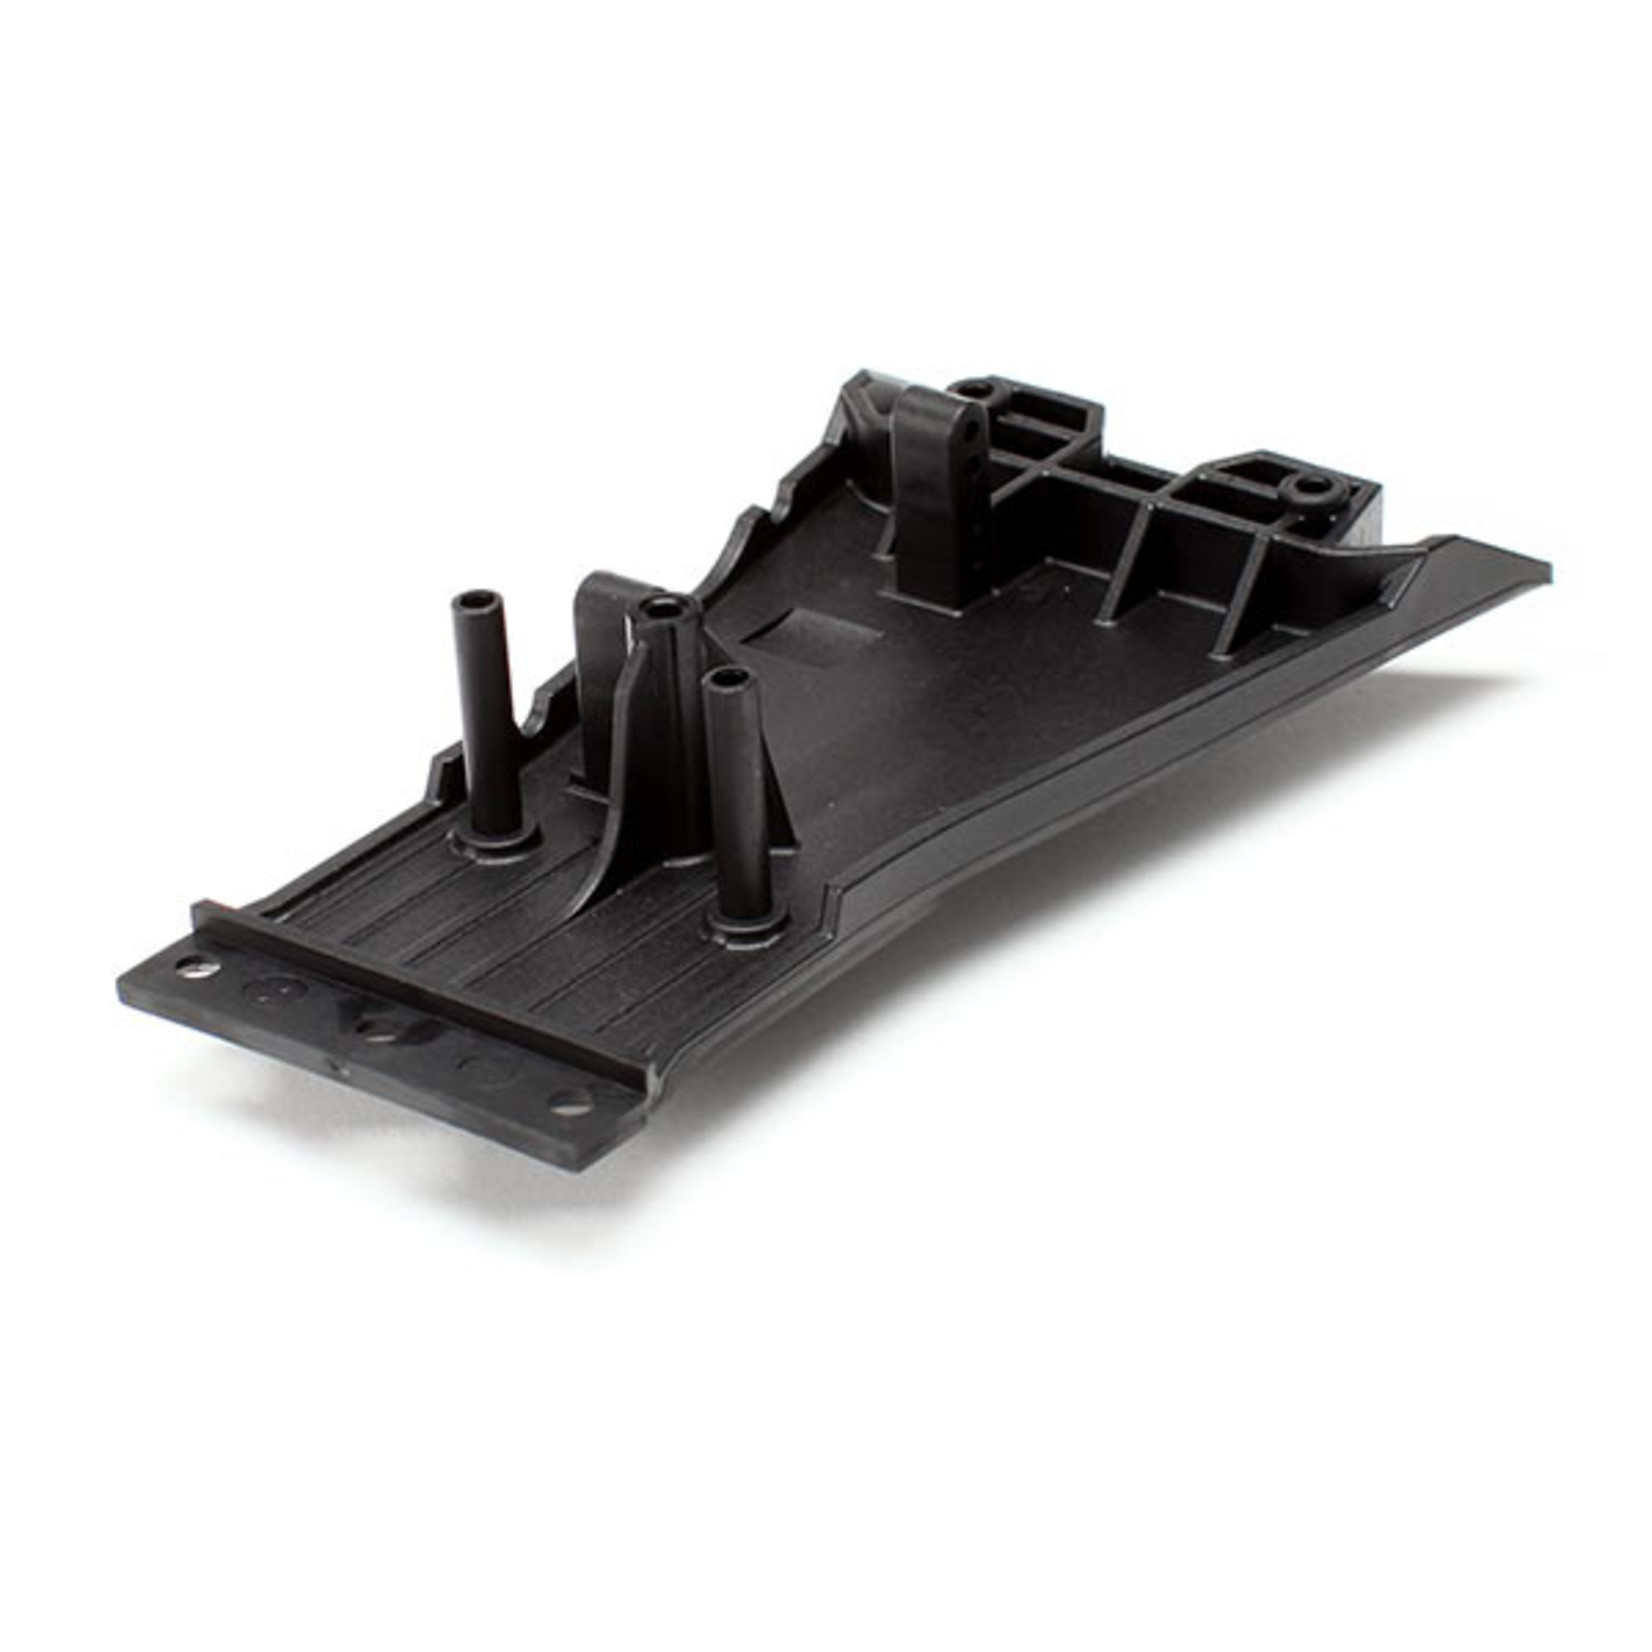 Traxxas 5831 - Lower chassis, low CG (black)